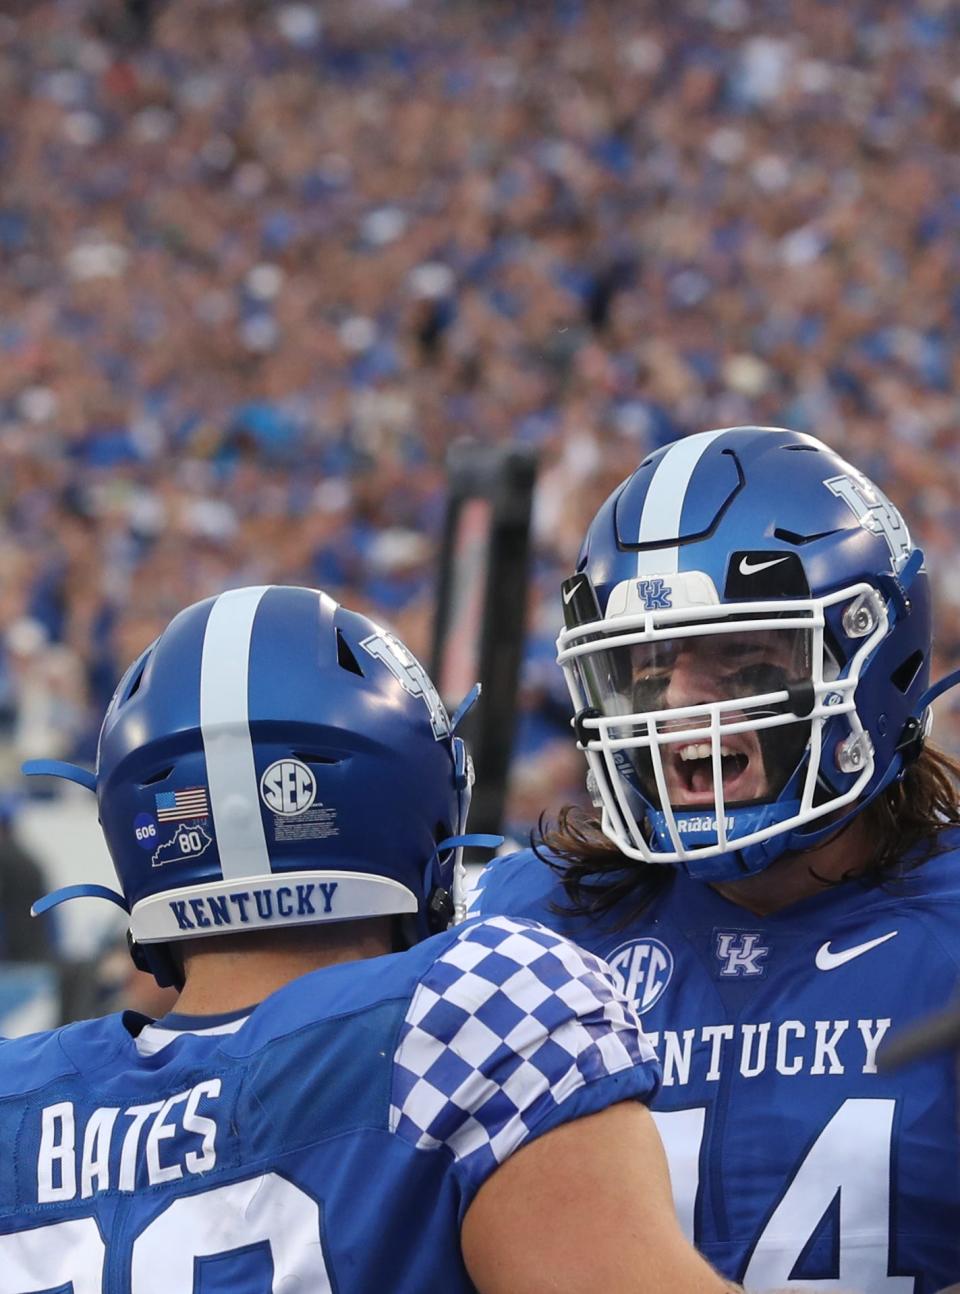 Kentucky’s Brenden Bates celebrates scoring a touchdown with teammate David Wohlabaugh in the 1st quarter against Miami of Ohio.Sept. 3, 2022